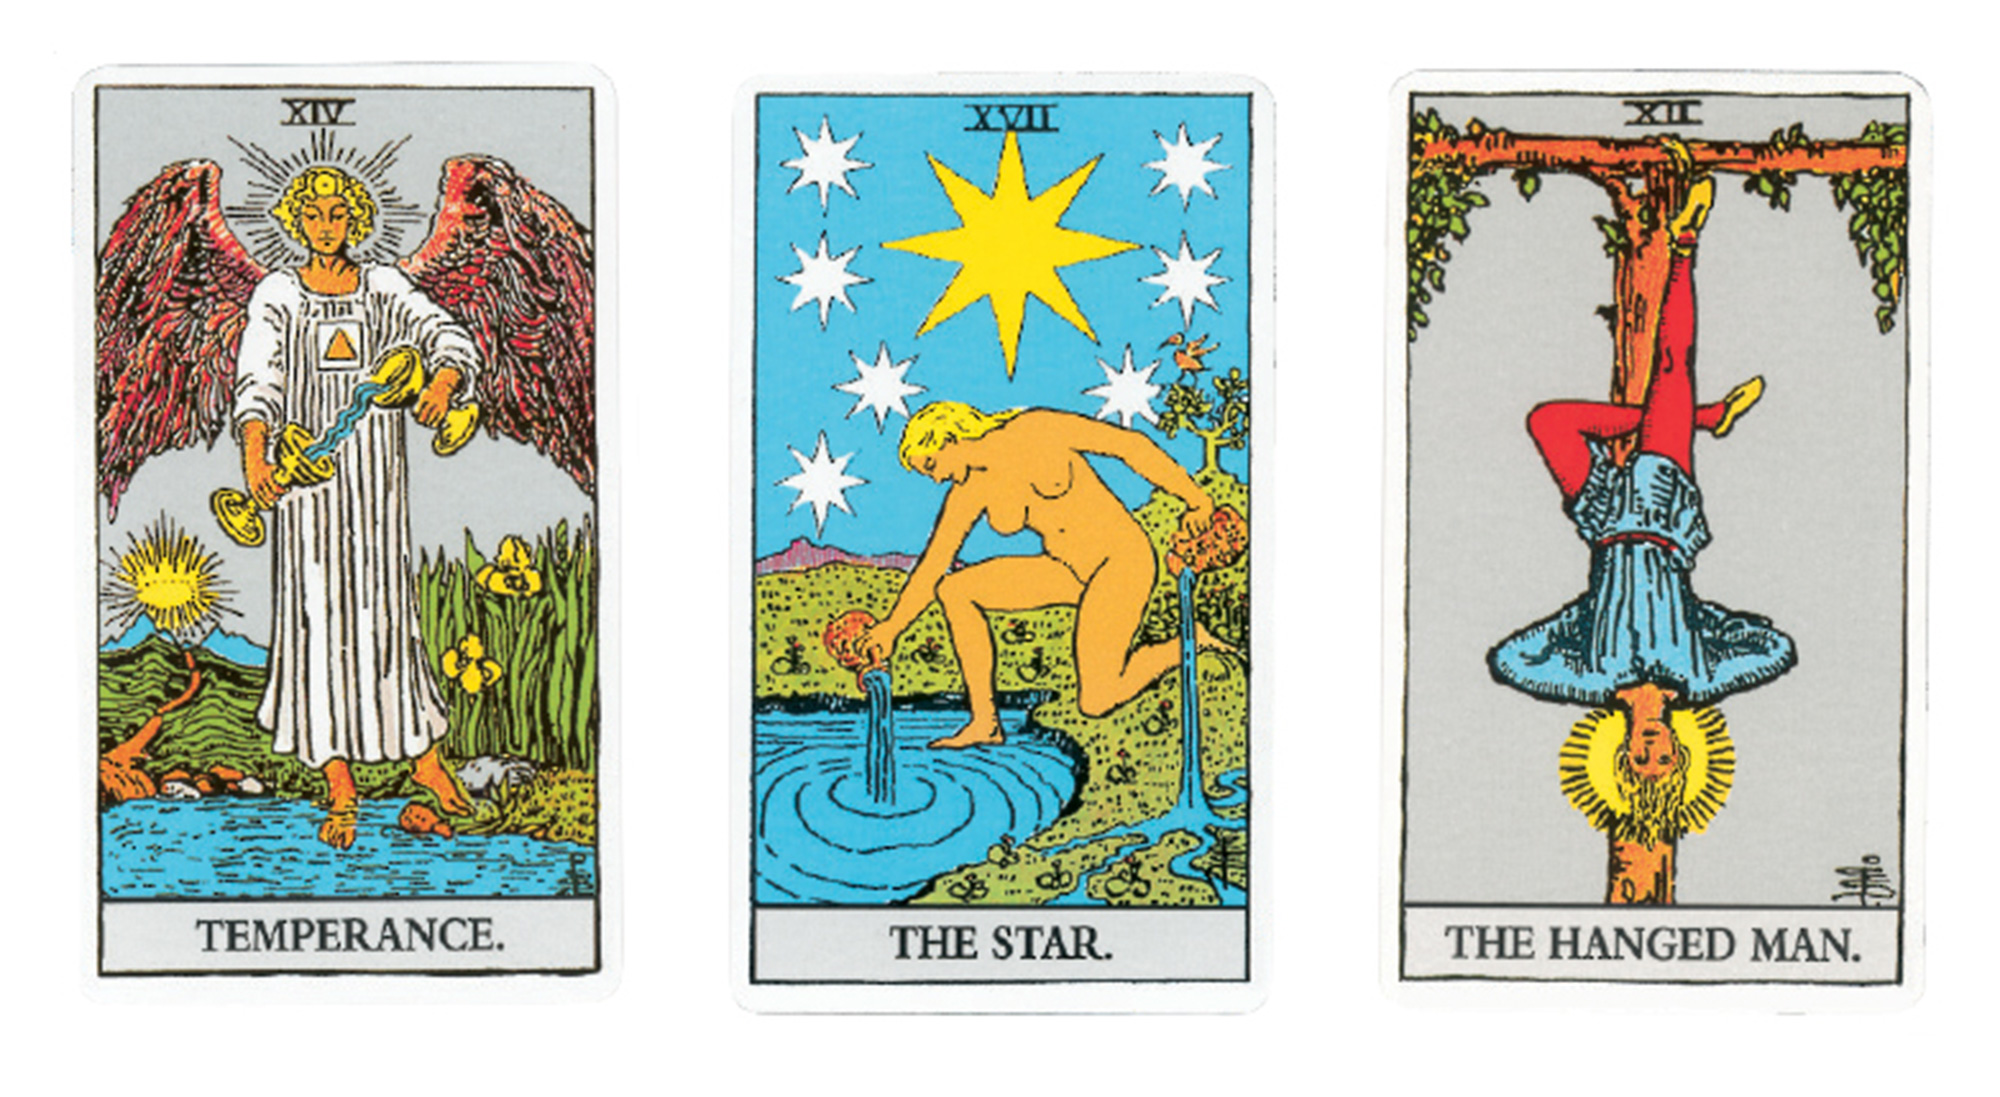  “Temperance,” “The star,” and “The hanged man” Tarot cards.